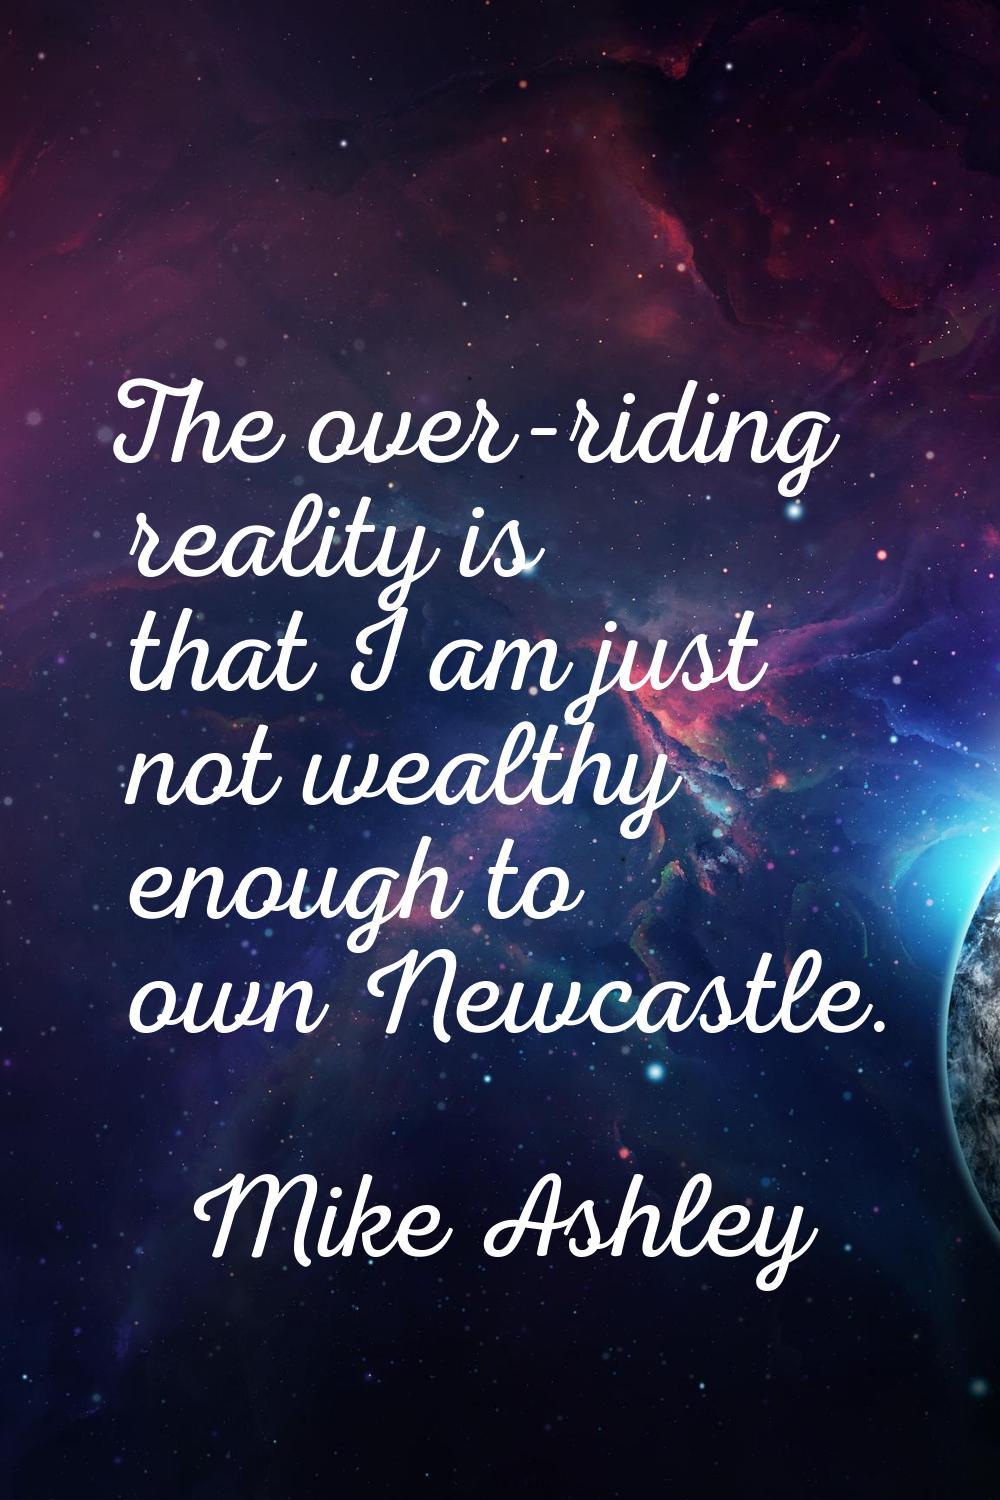 The over-riding reality is that I am just not wealthy enough to own Newcastle.